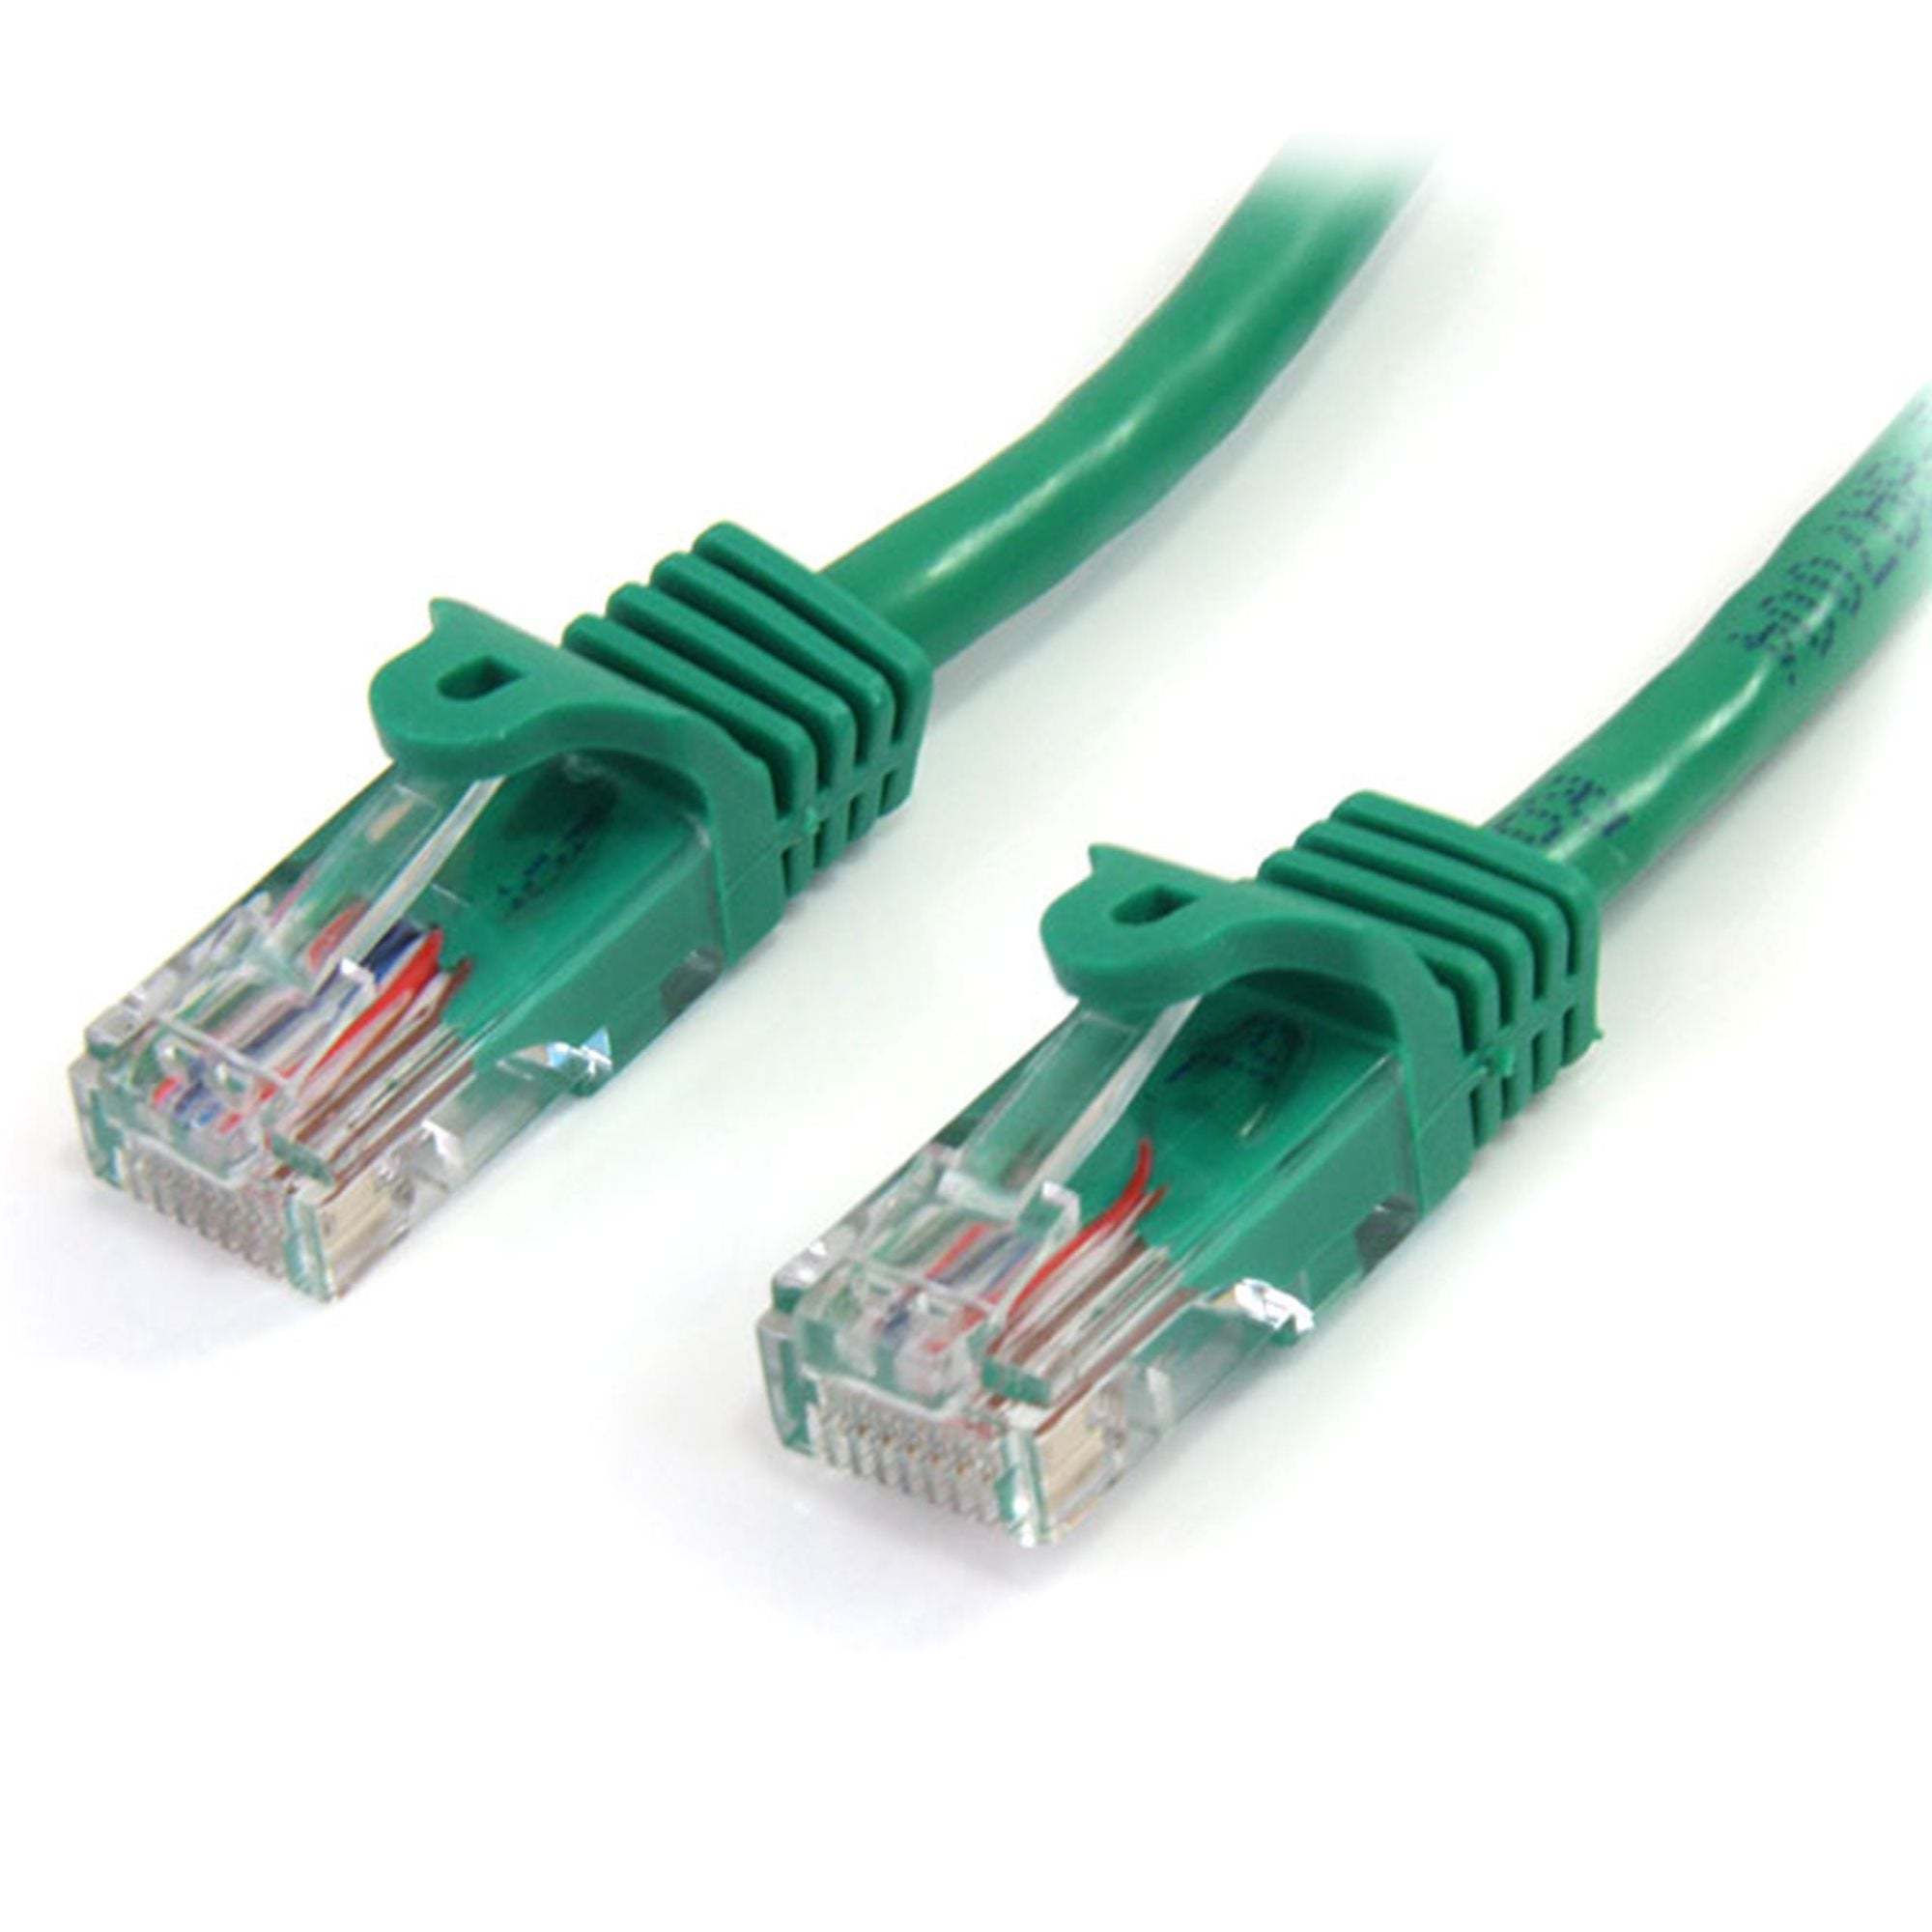 StarTech.com Cat5e Patch Cable with Snagless RJ45 Connectors - 2m, Green